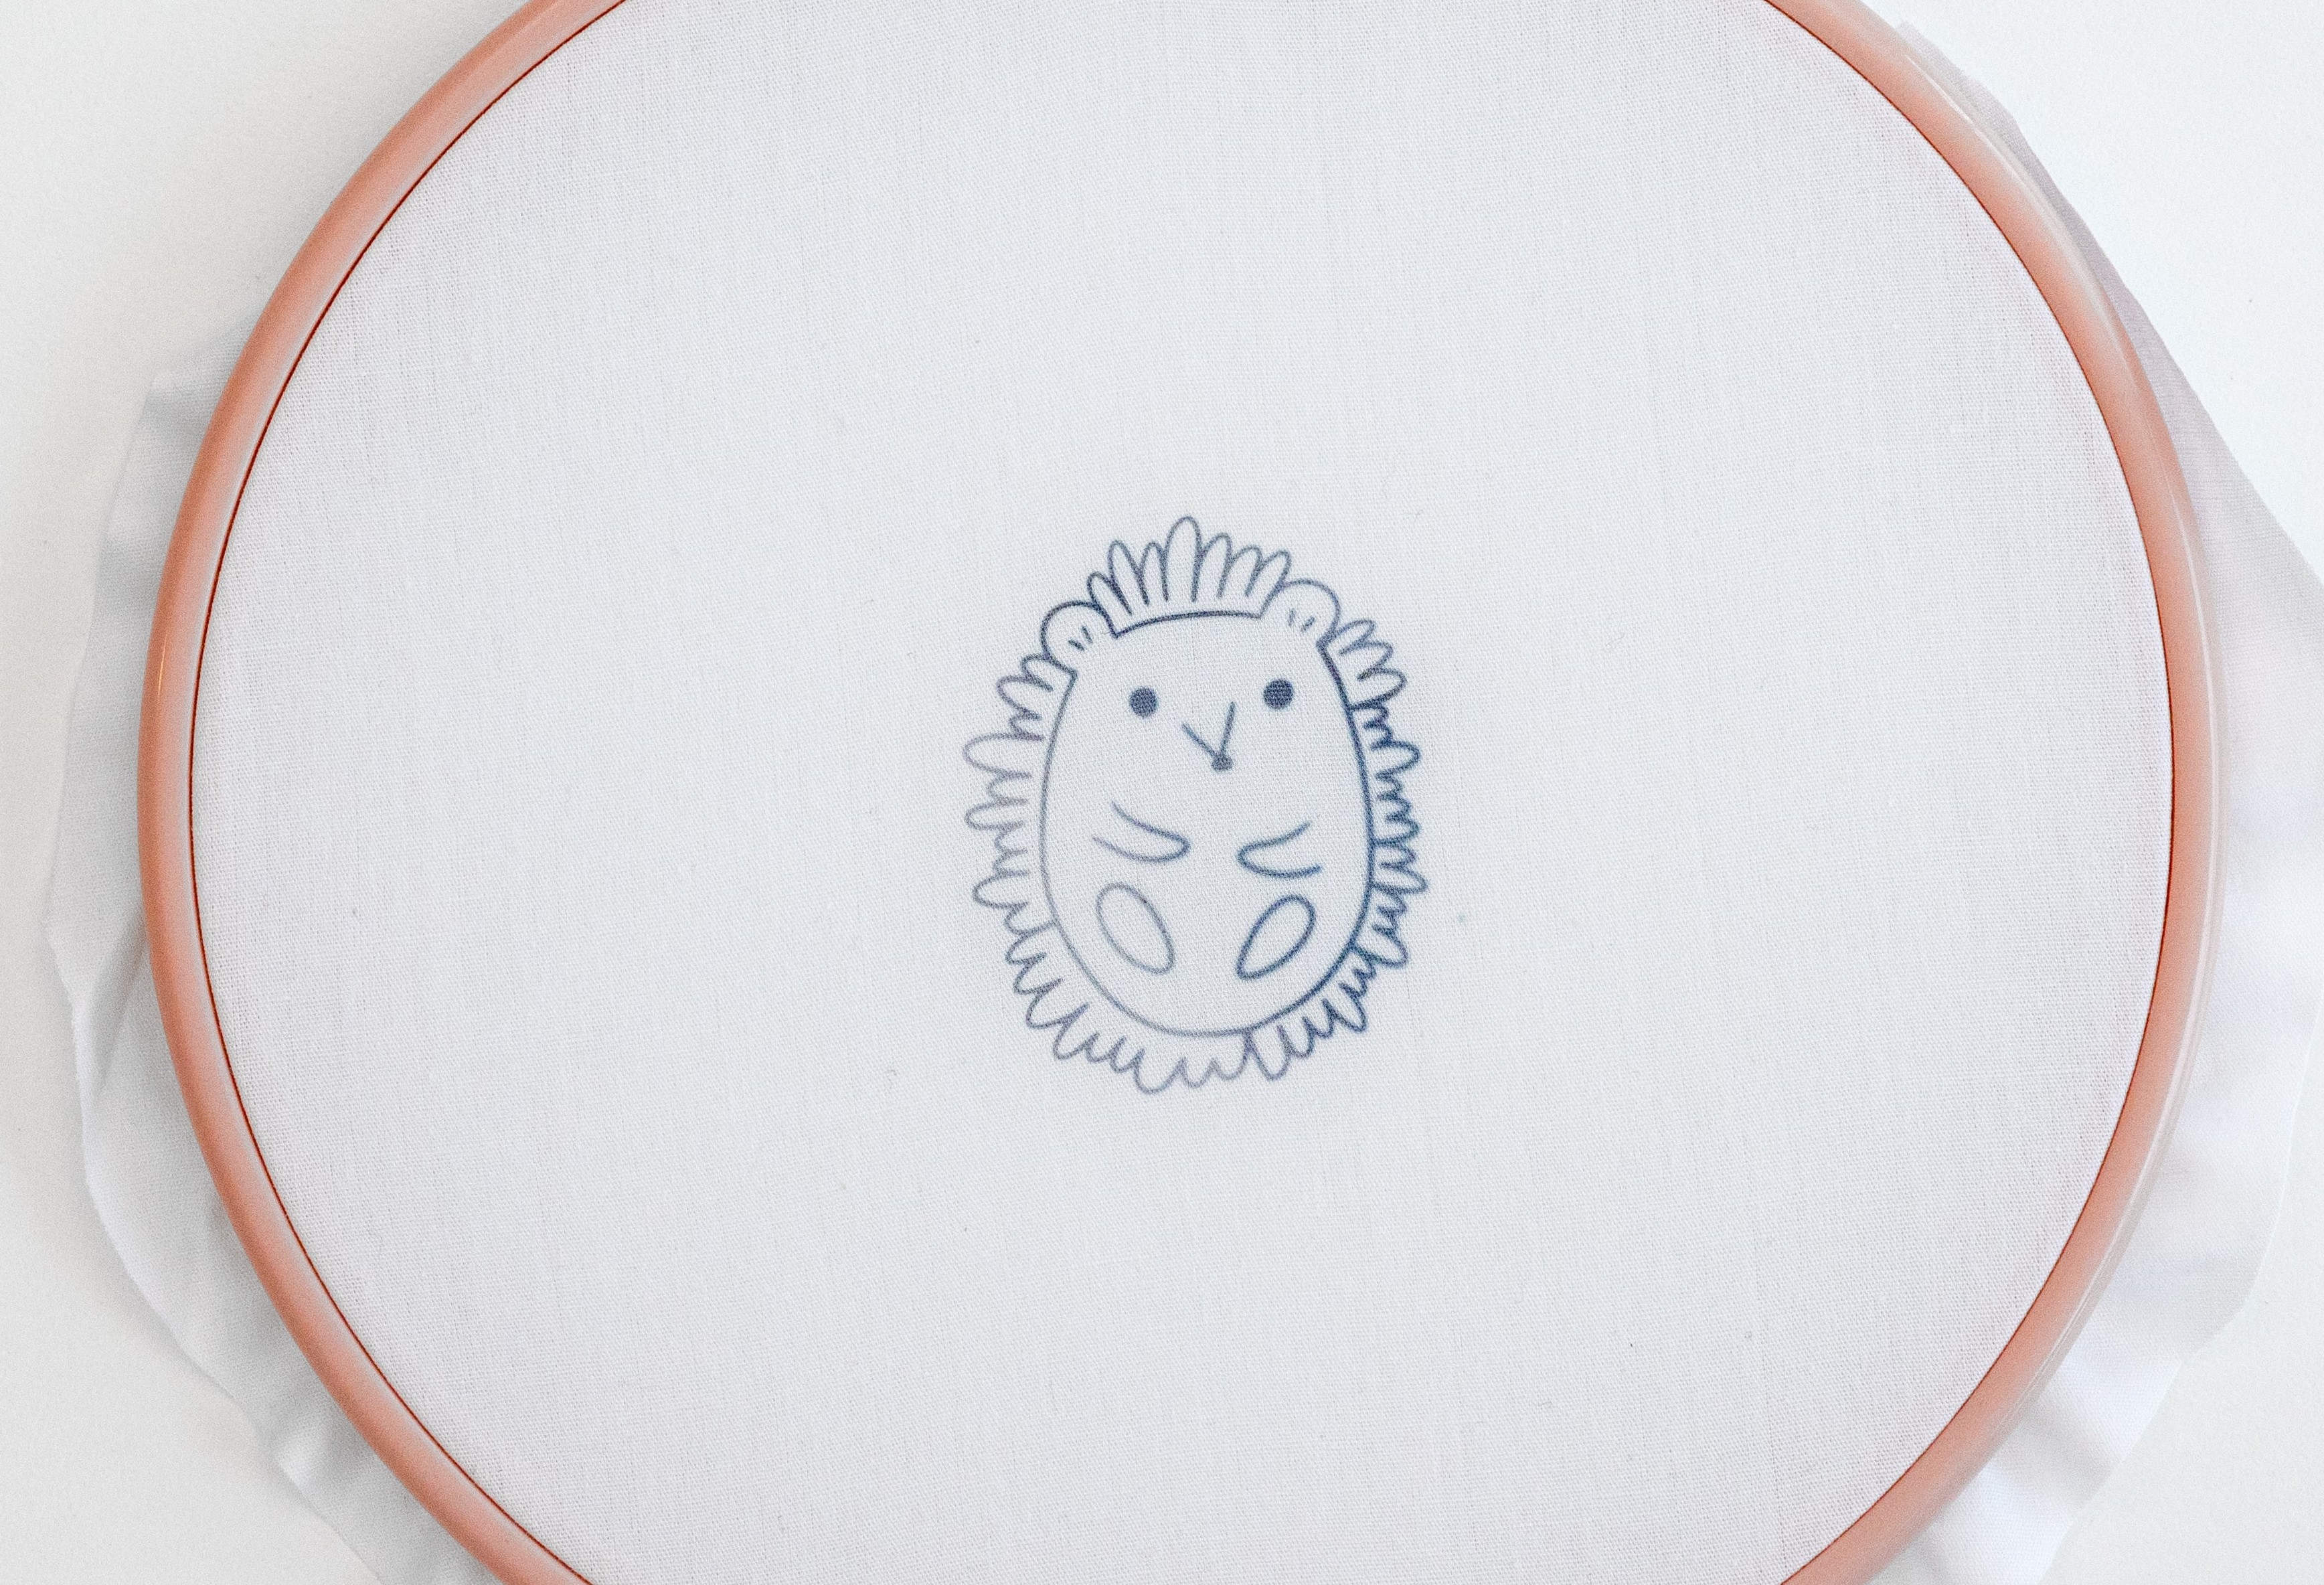 A hedgehog pattern has been transferred onto the hoop.